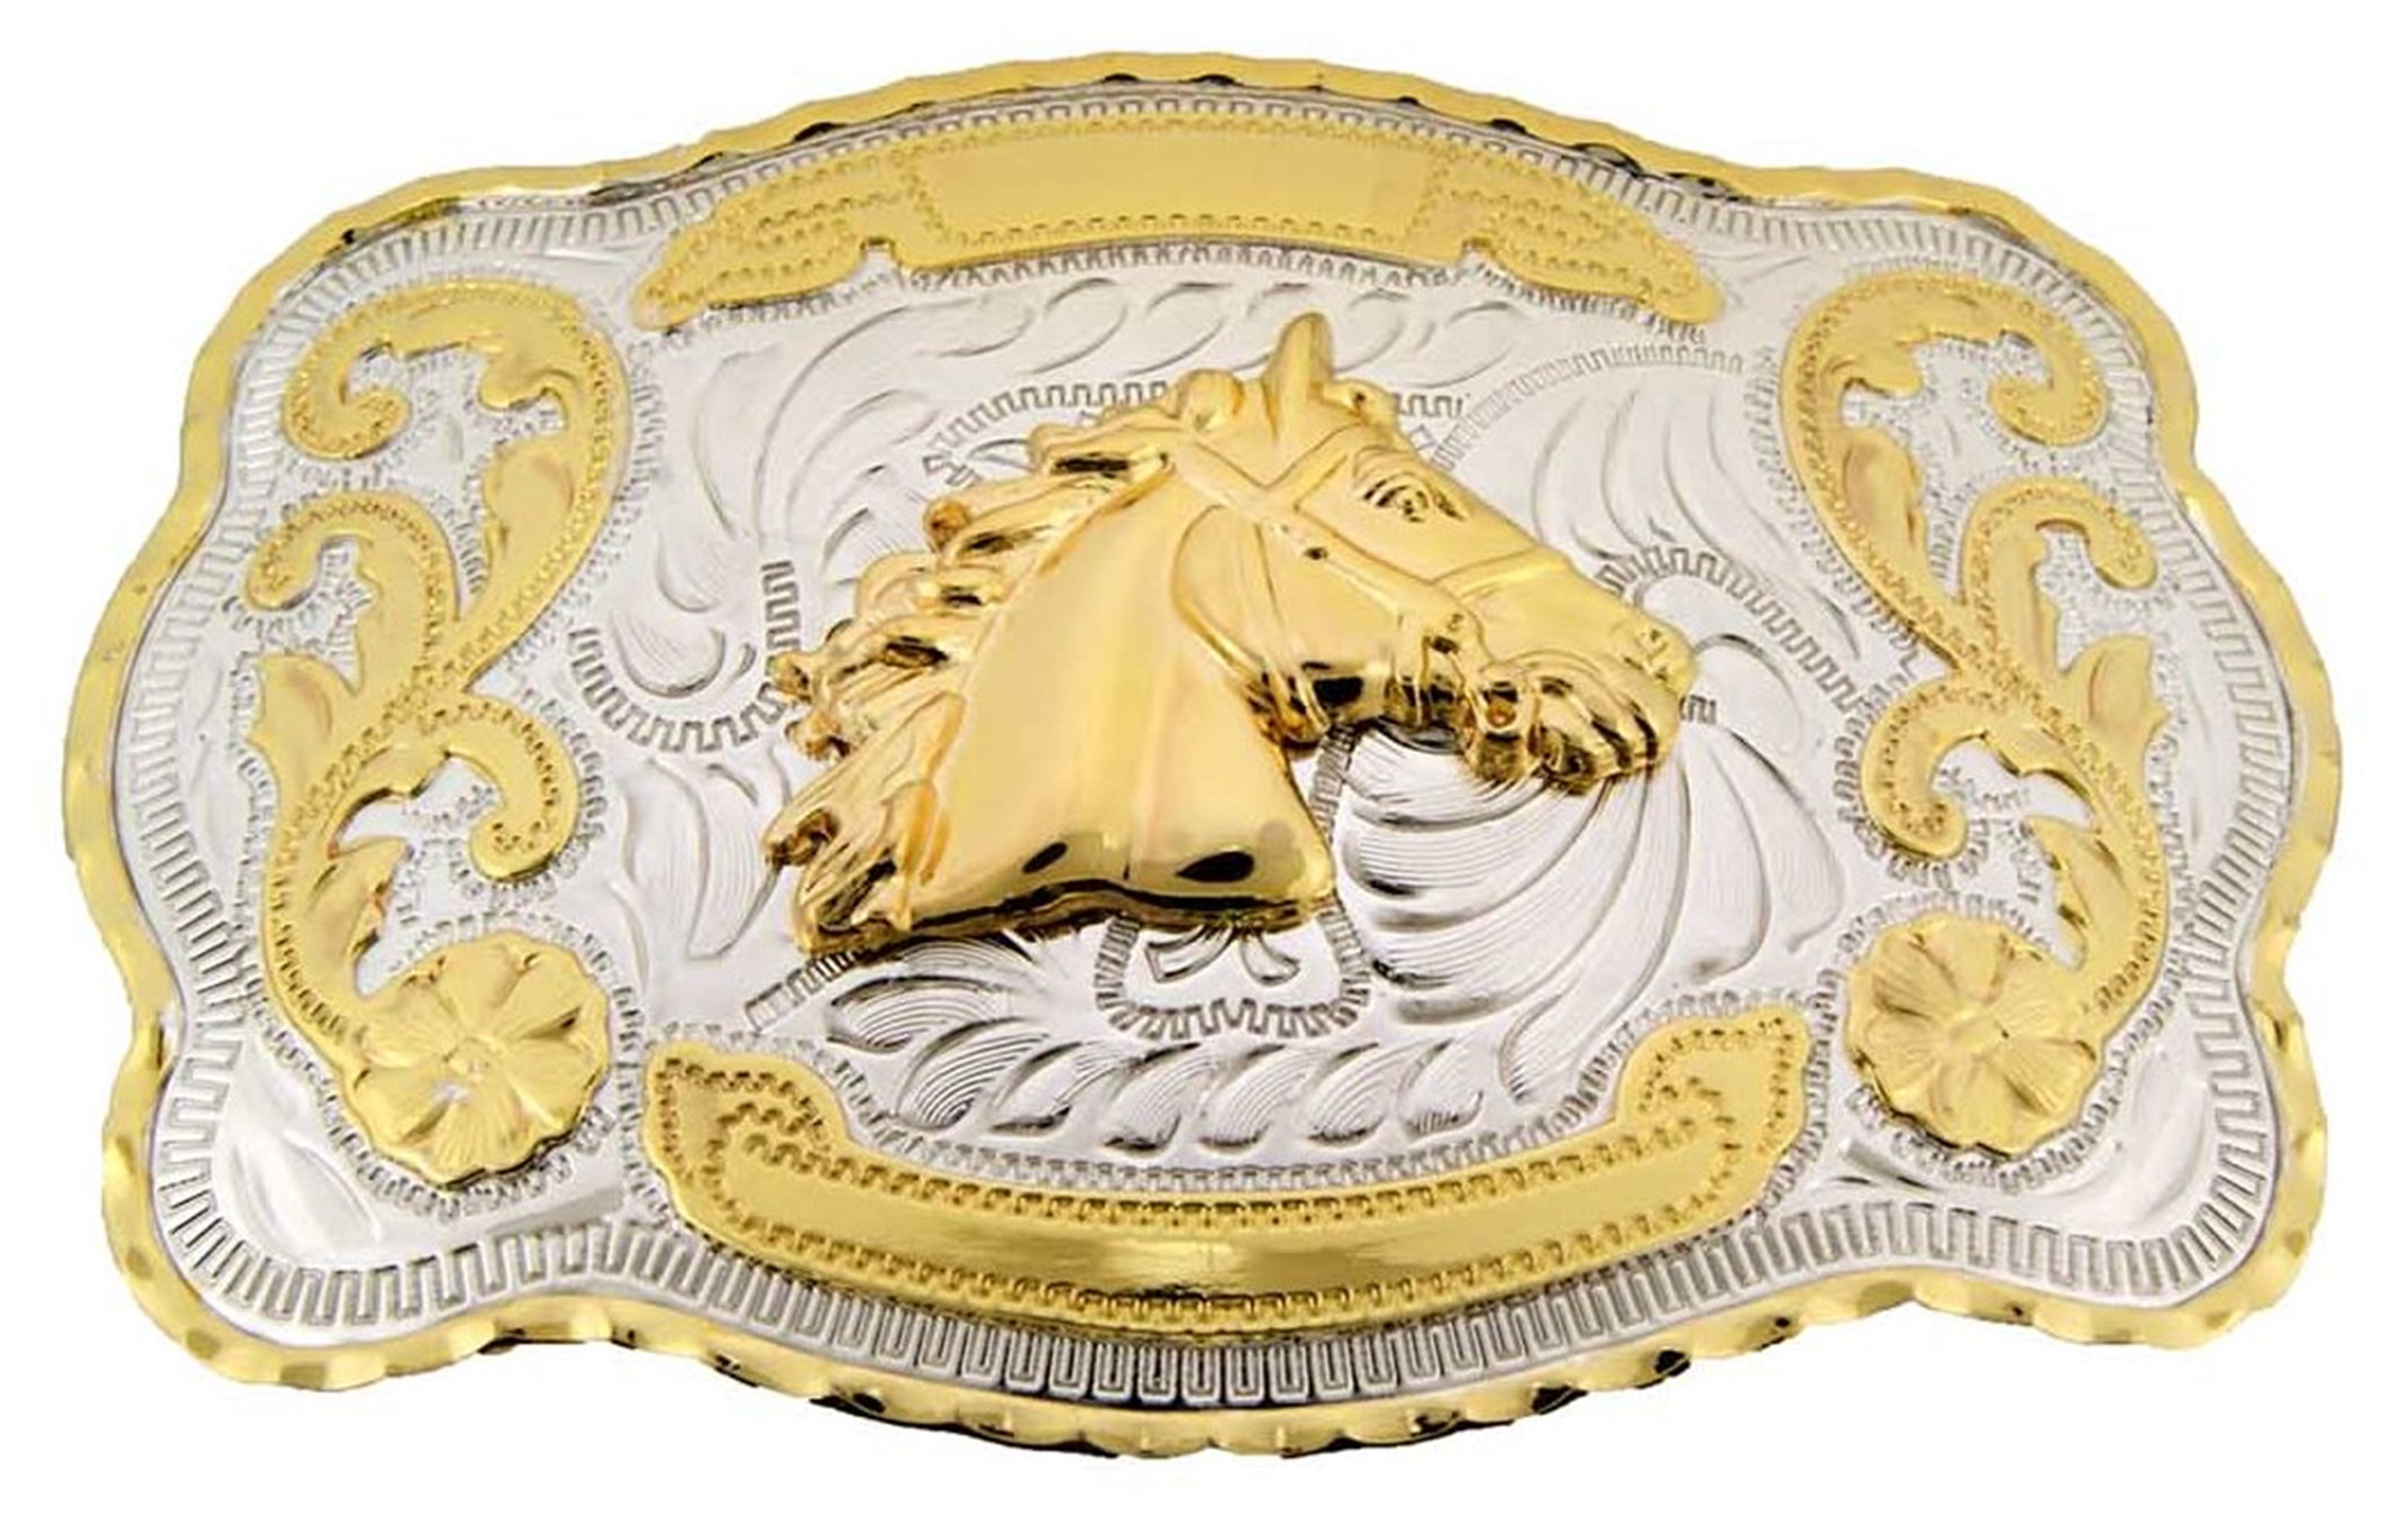 compact Contractie tijger Horse Belt Buckle Western Rodeo Cowboy Cowgirl Unisex Gold Silver Metal  Fashion Accessory Costume New Large - Walmart.com